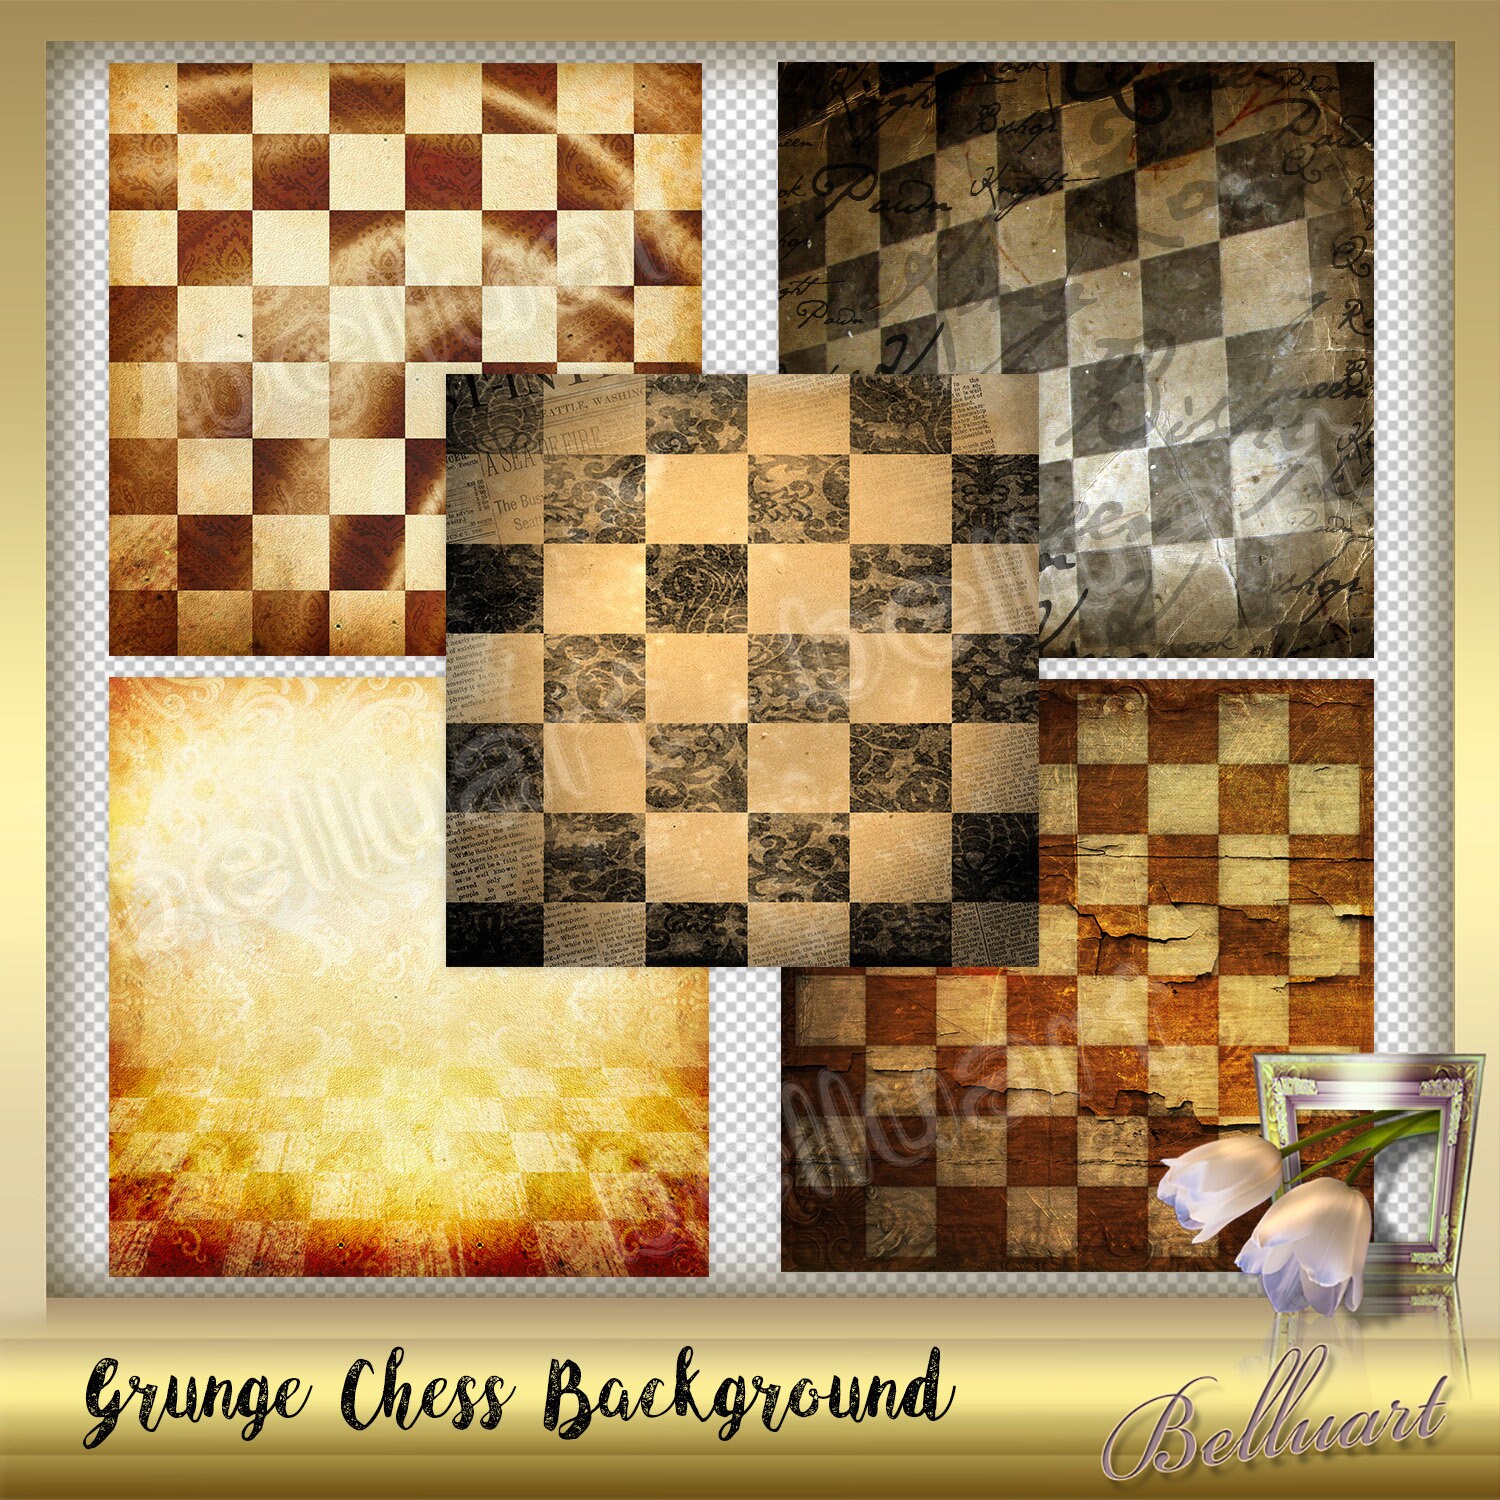 Free Board, Chessboard, Flames Background Images, Chess Board